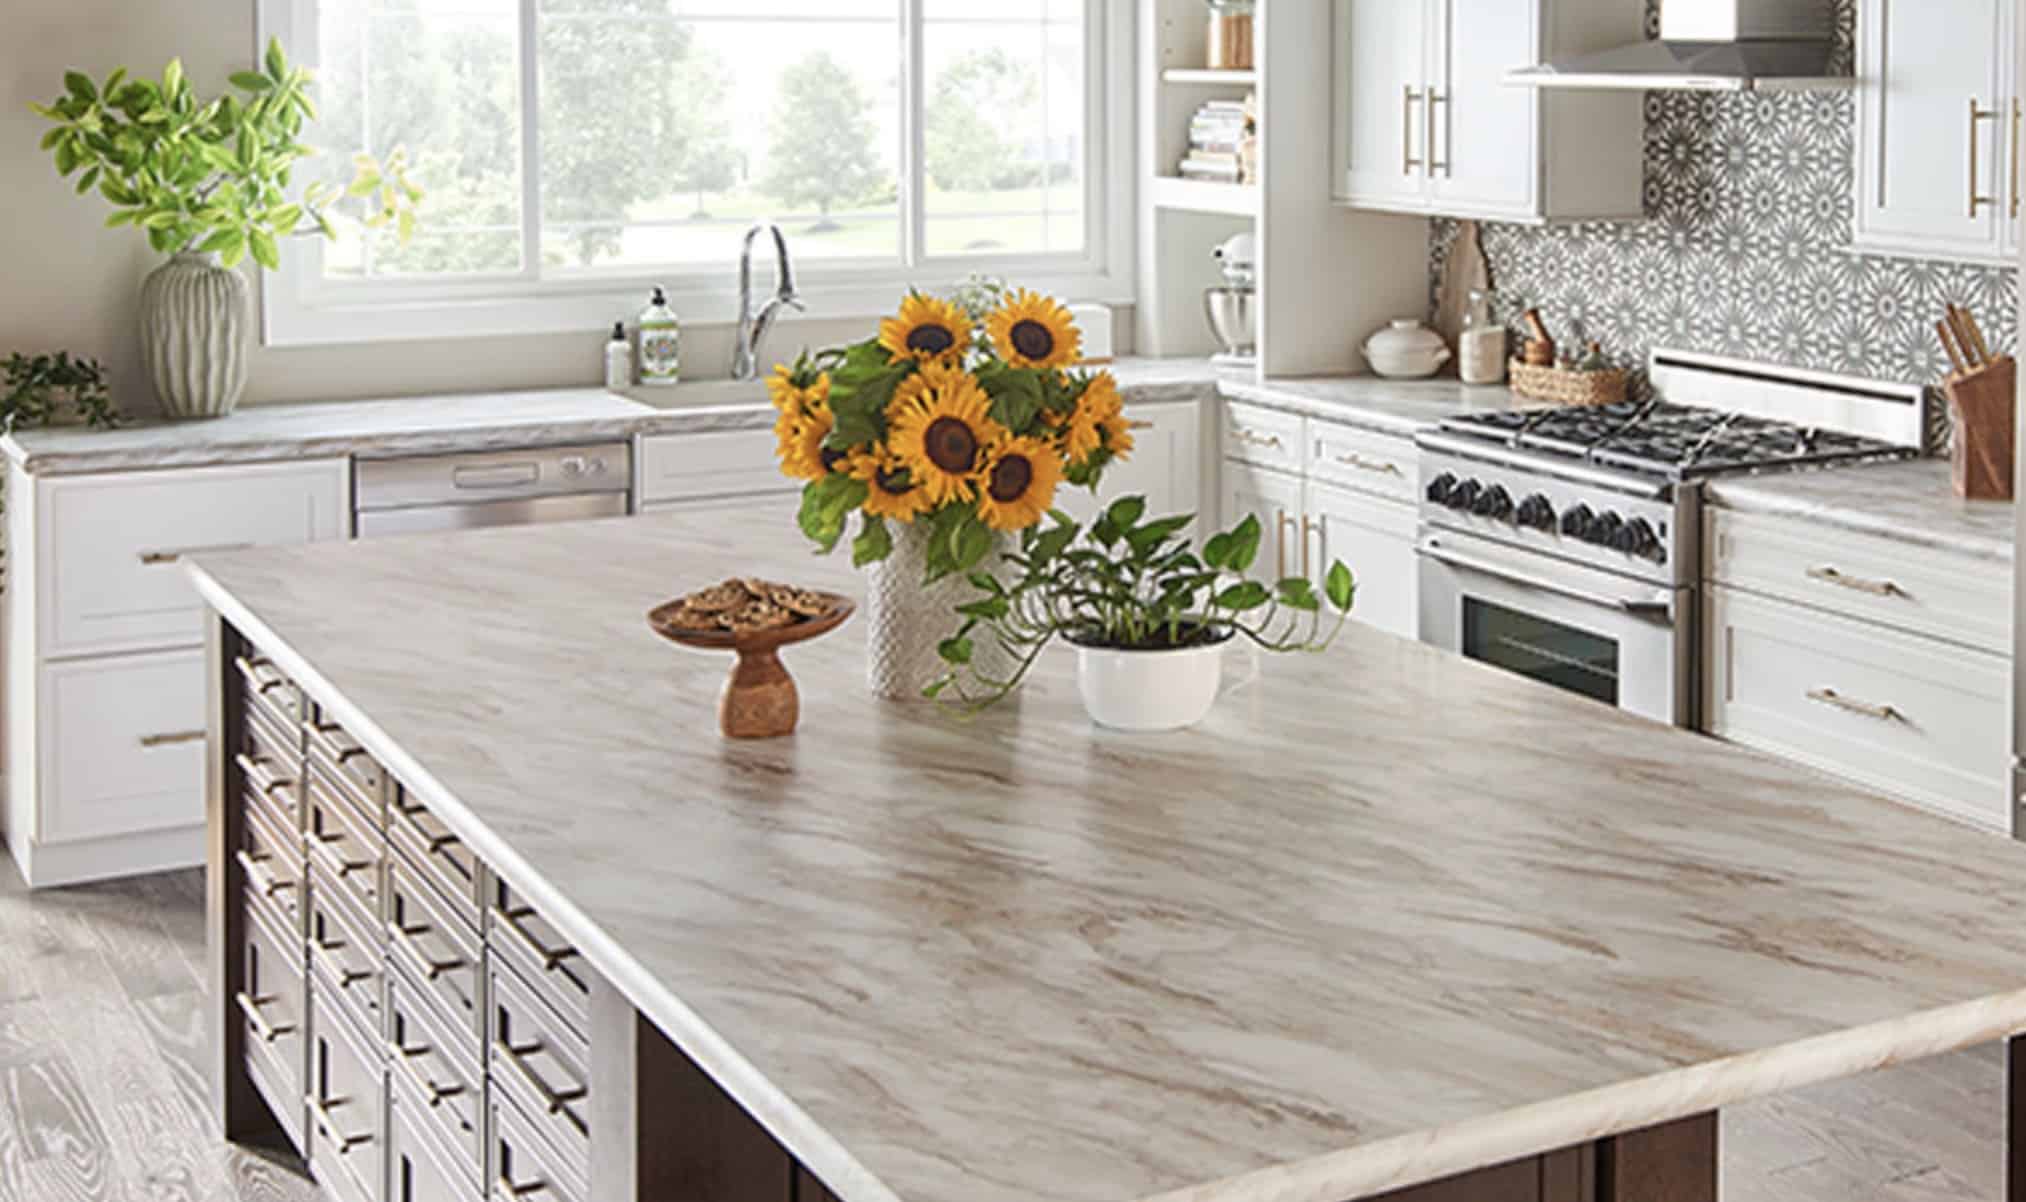 Installing Laminate Countertops, How Much Does It Cost To Install Laminate Countertops